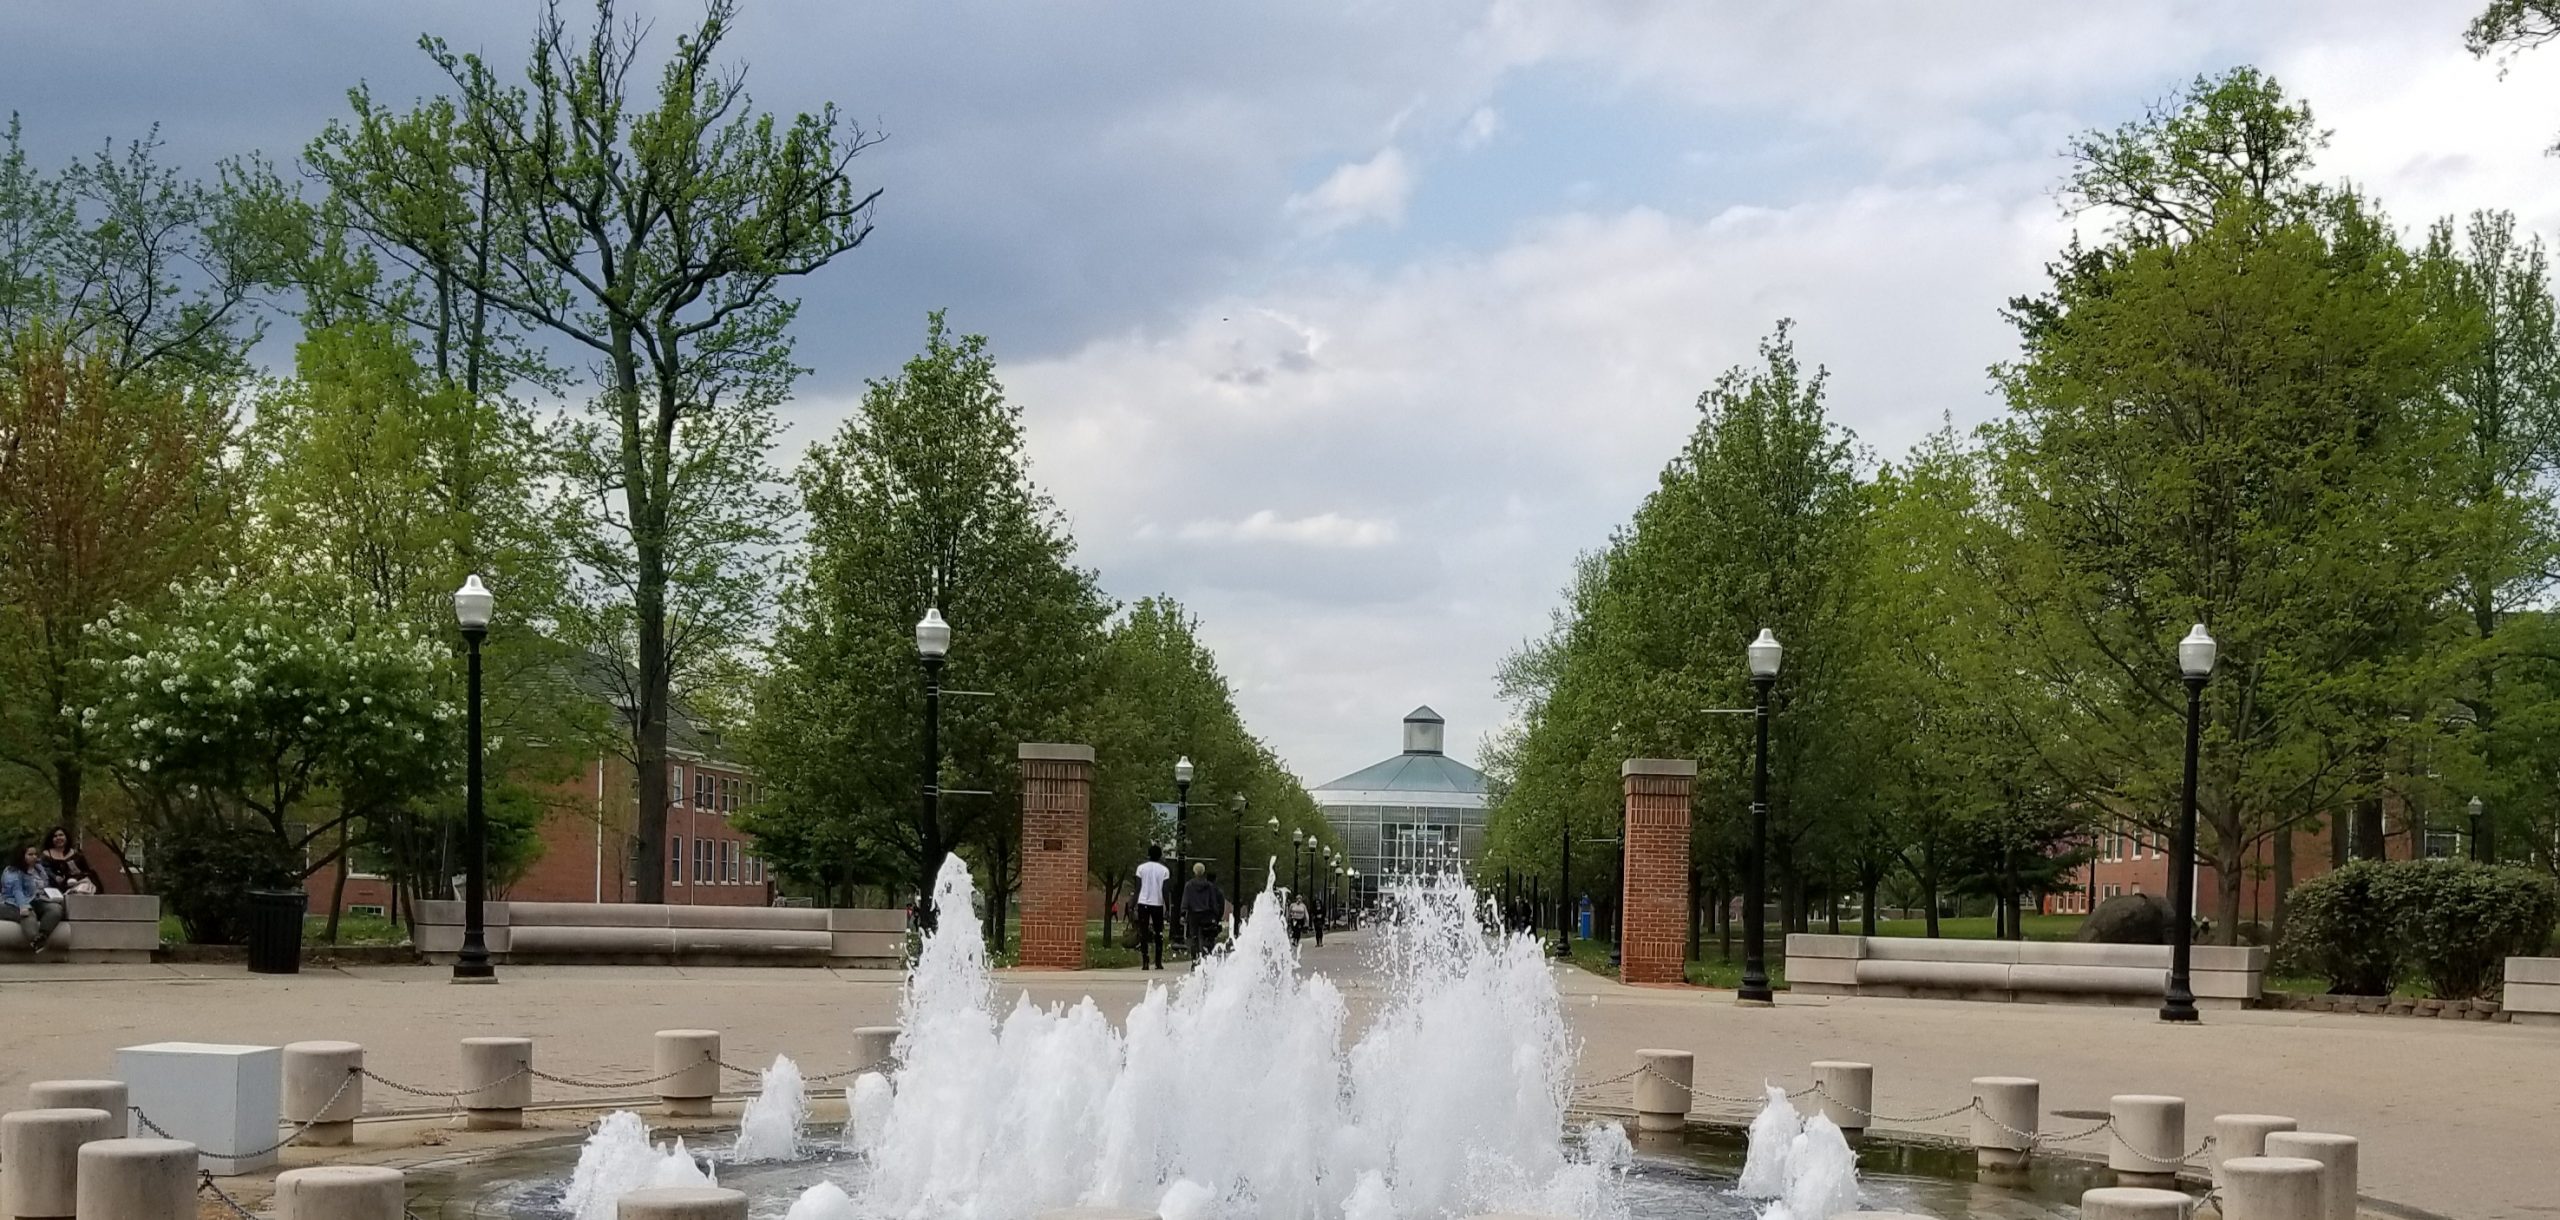 View of the College of Staten Island with a large fountain in the foreground.